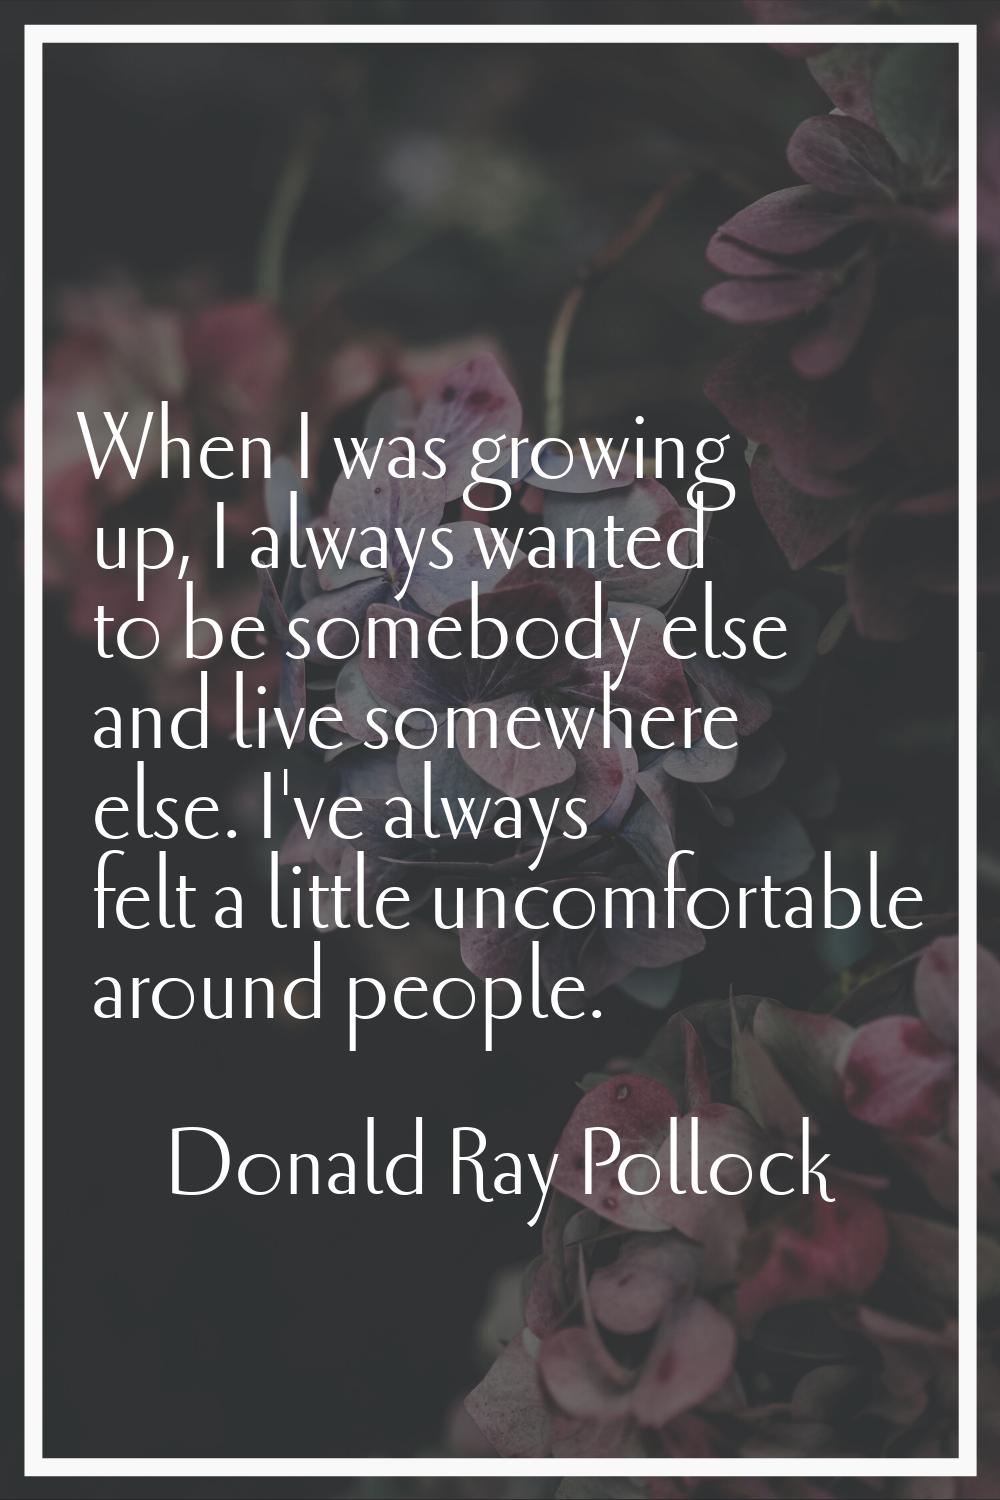 When I was growing up, I always wanted to be somebody else and live somewhere else. I've always fel